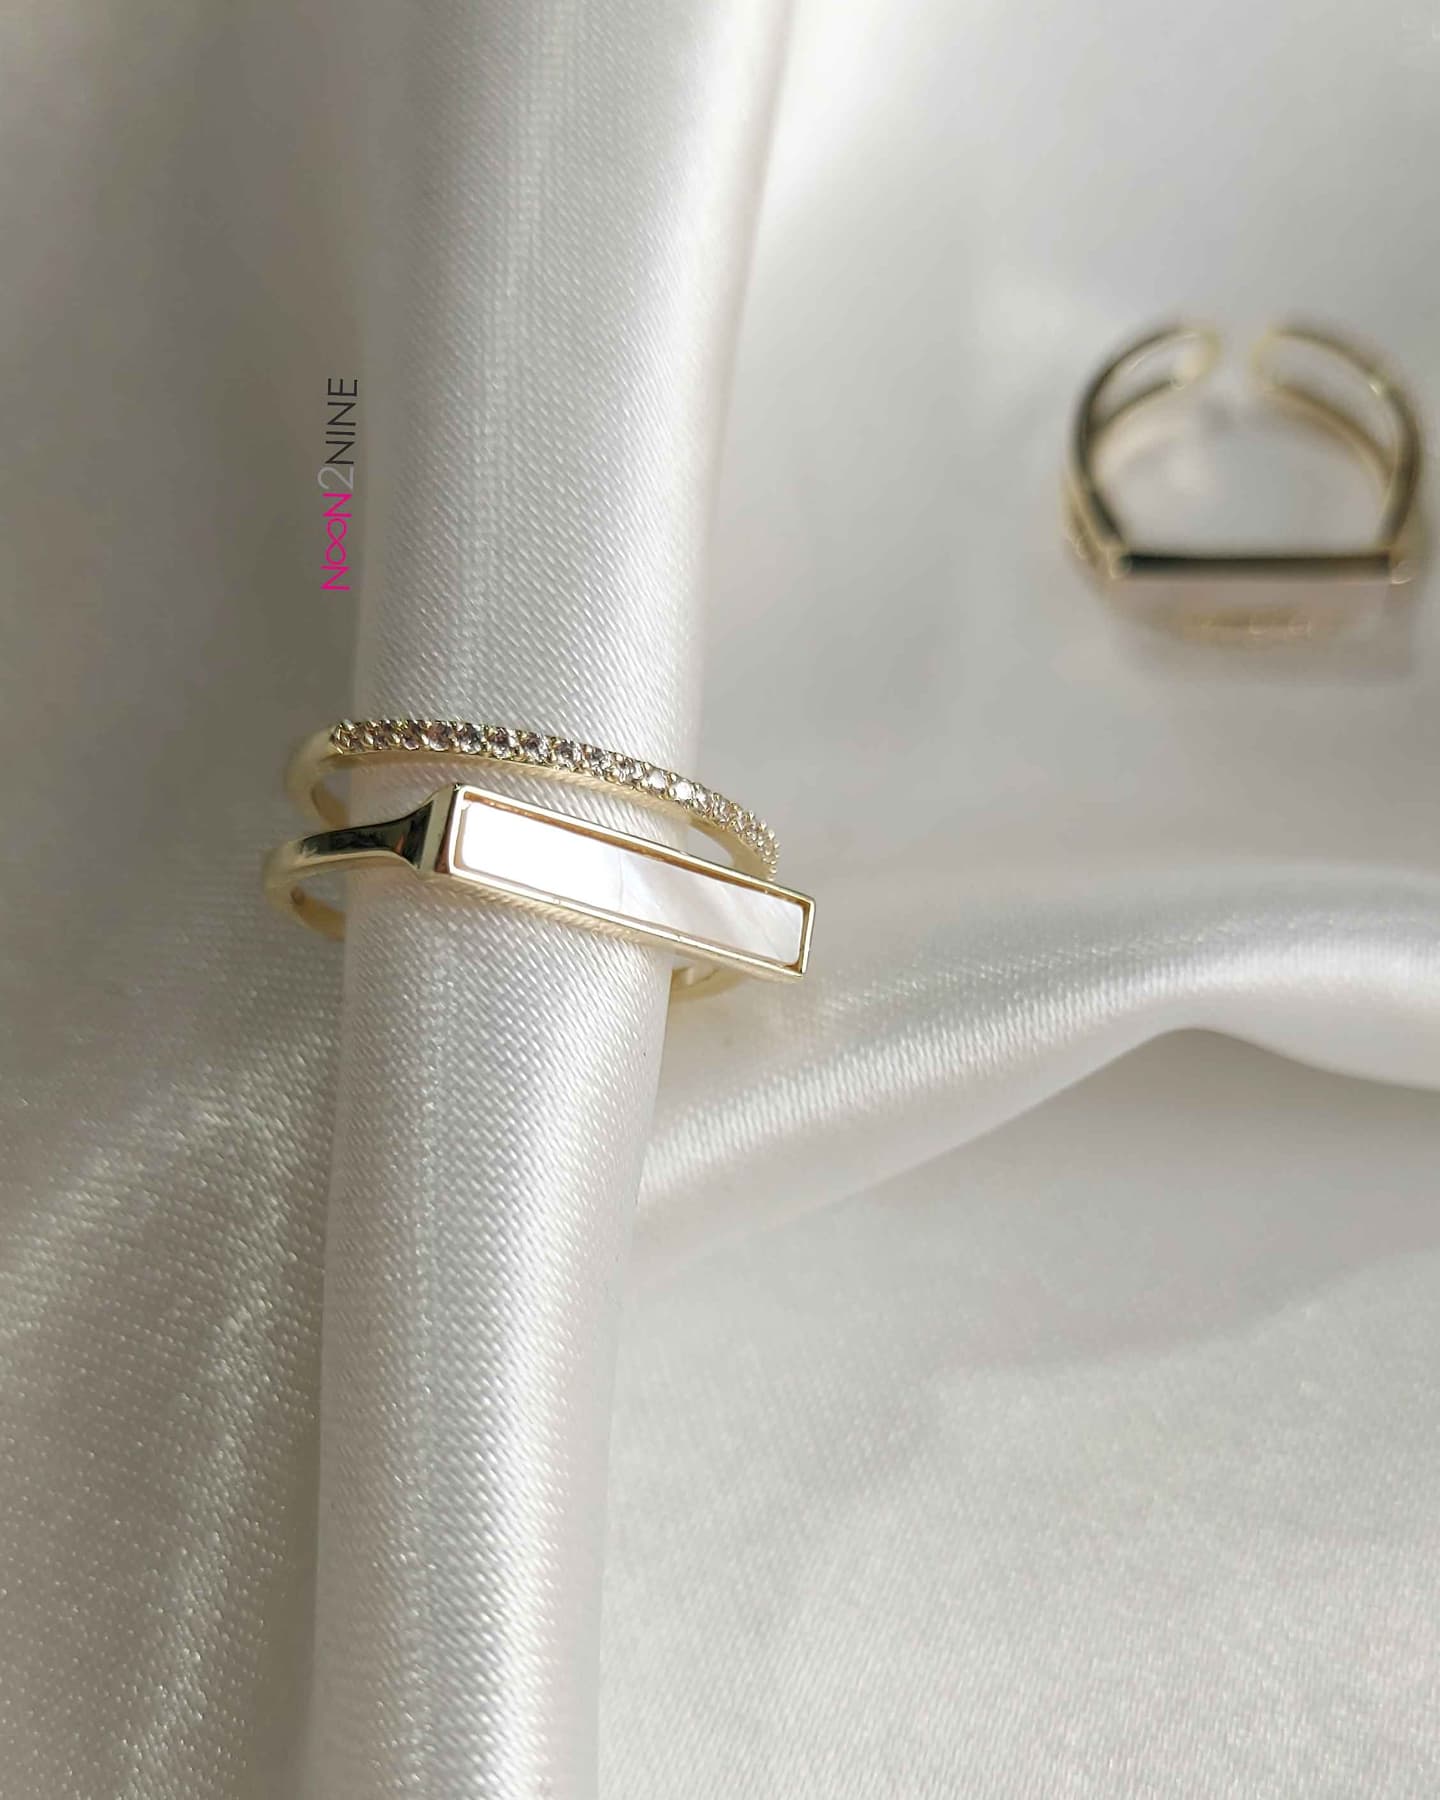 The Esme Ring in mother of pearl